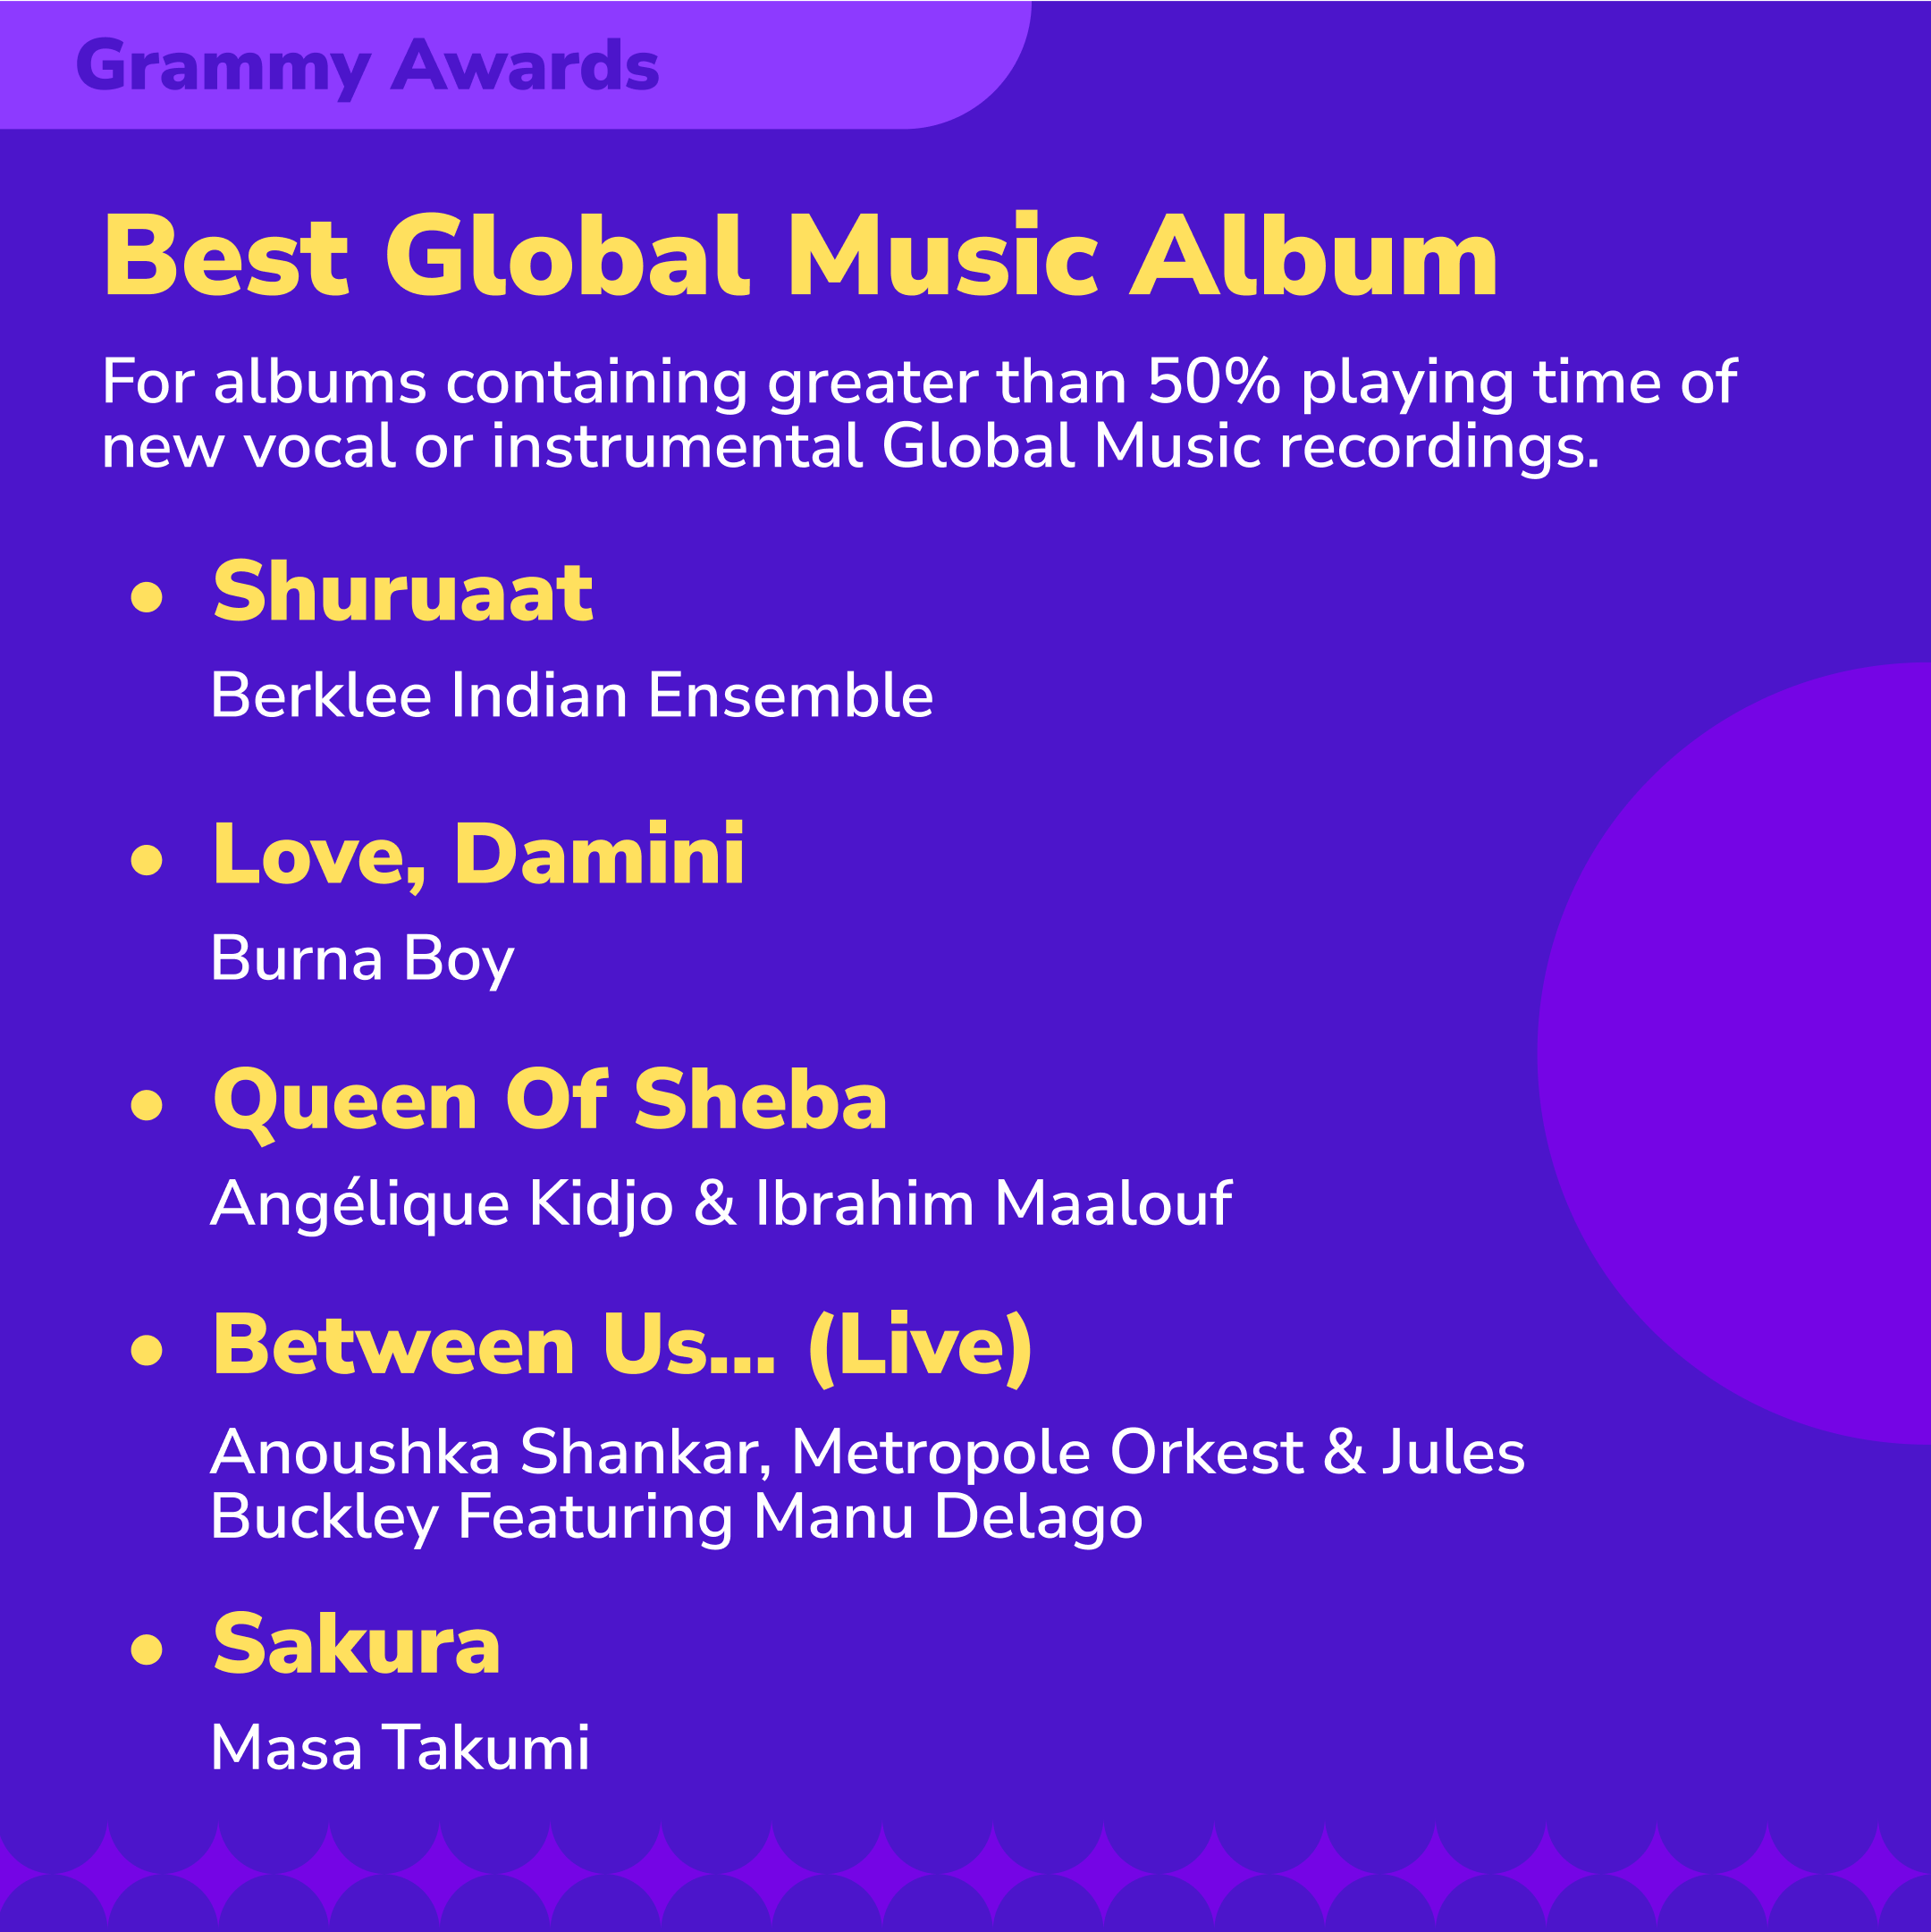 Cheer on our African stars nominated for the 65th Grammy Awards! Who will bring home the awards?